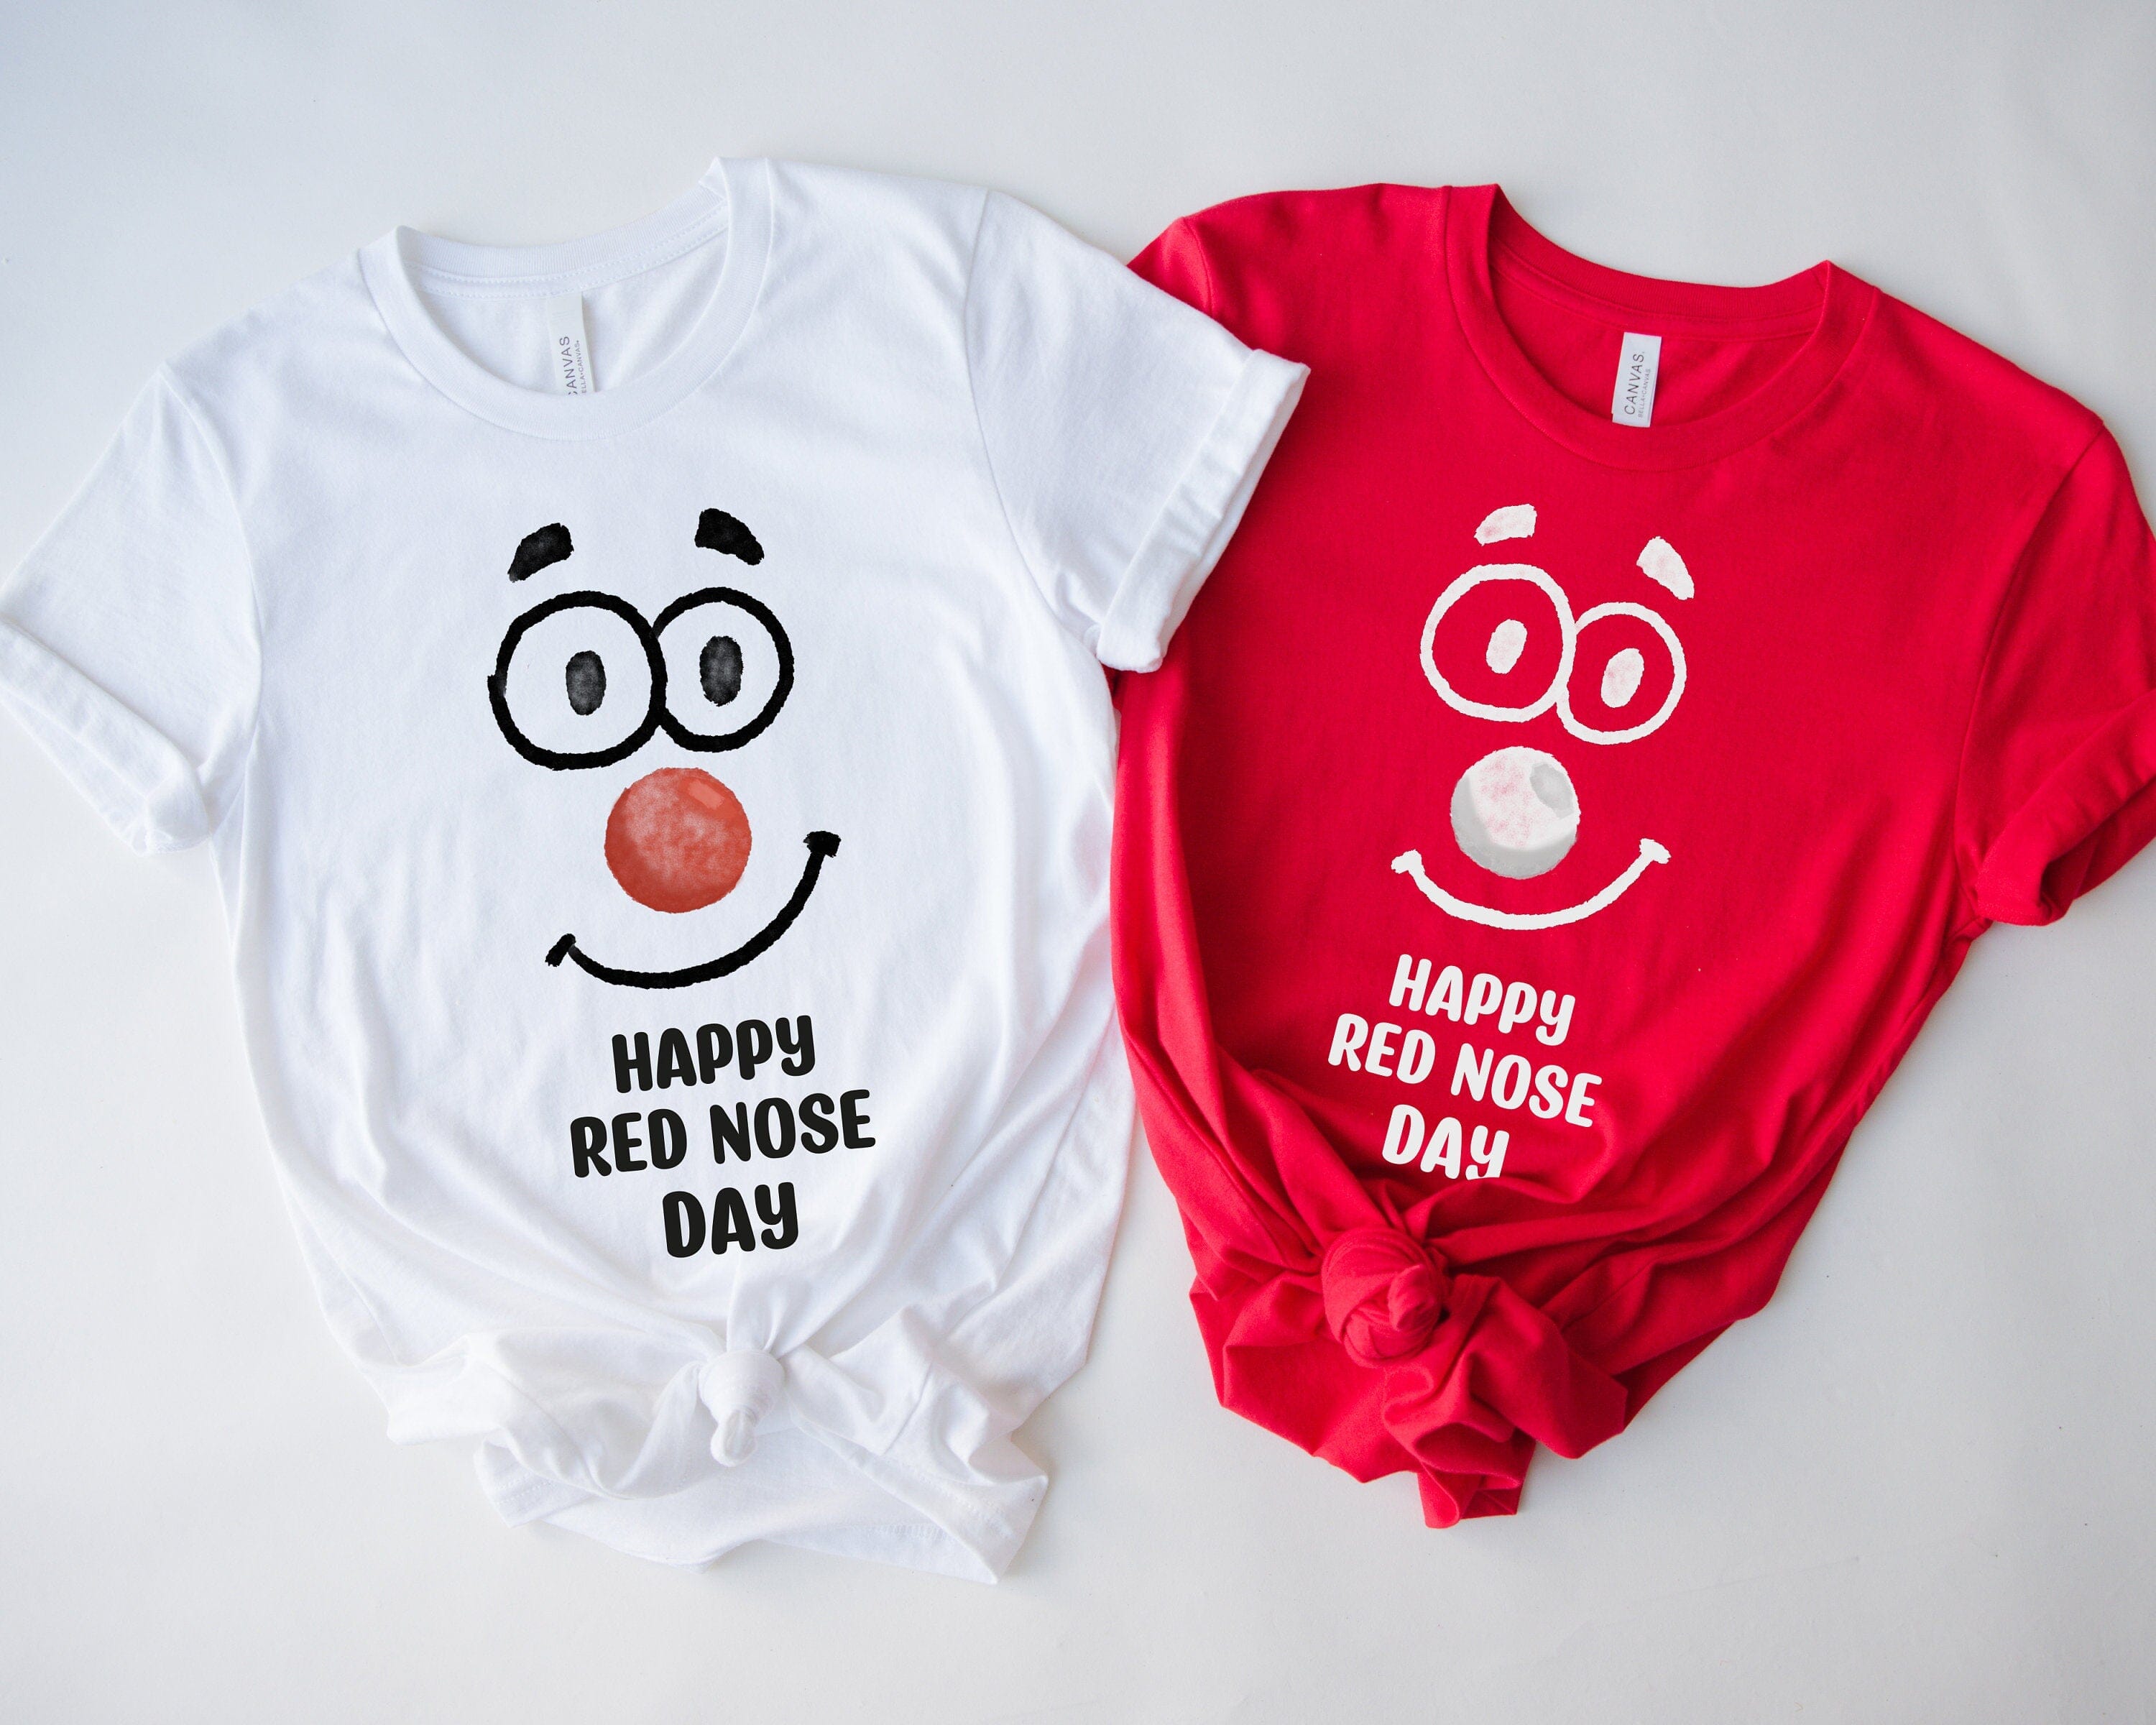 Red Nose Day T-Shirt, Adult And Kids Sizes, Red Nose Day Gift